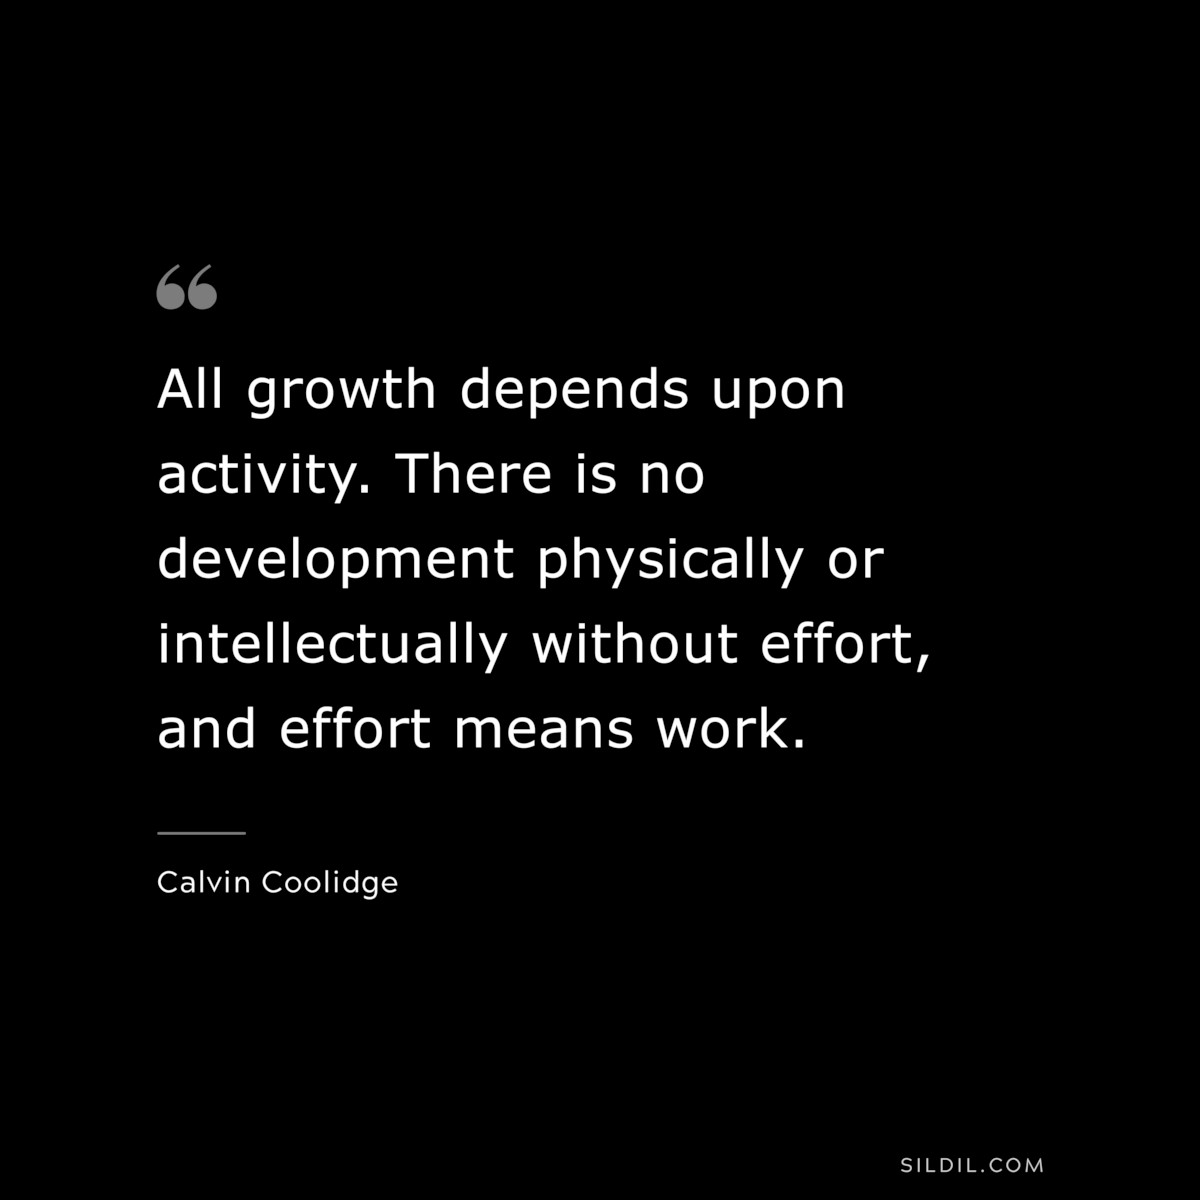 All growth depends upon activity. There is no development physically or intellectually without effort, and effort means work. ― Calvin Coolidge